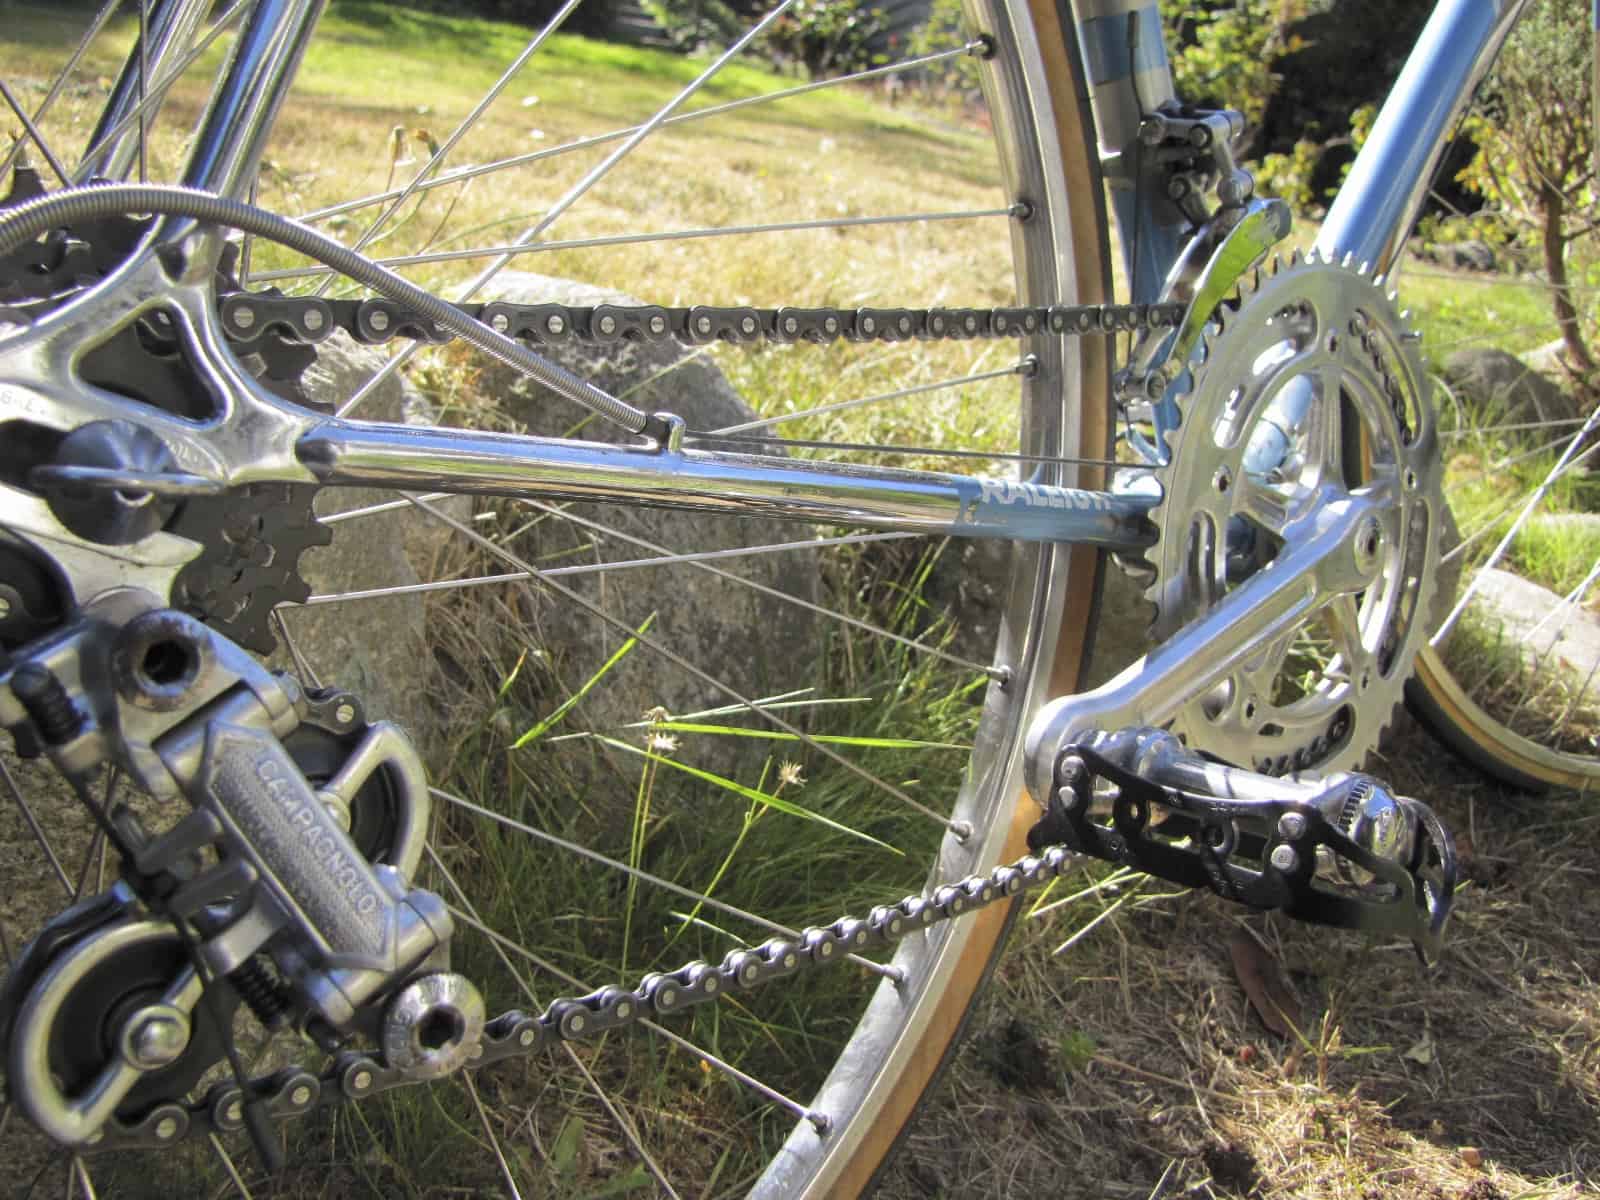 Raleigh Professional image of rear derailleur